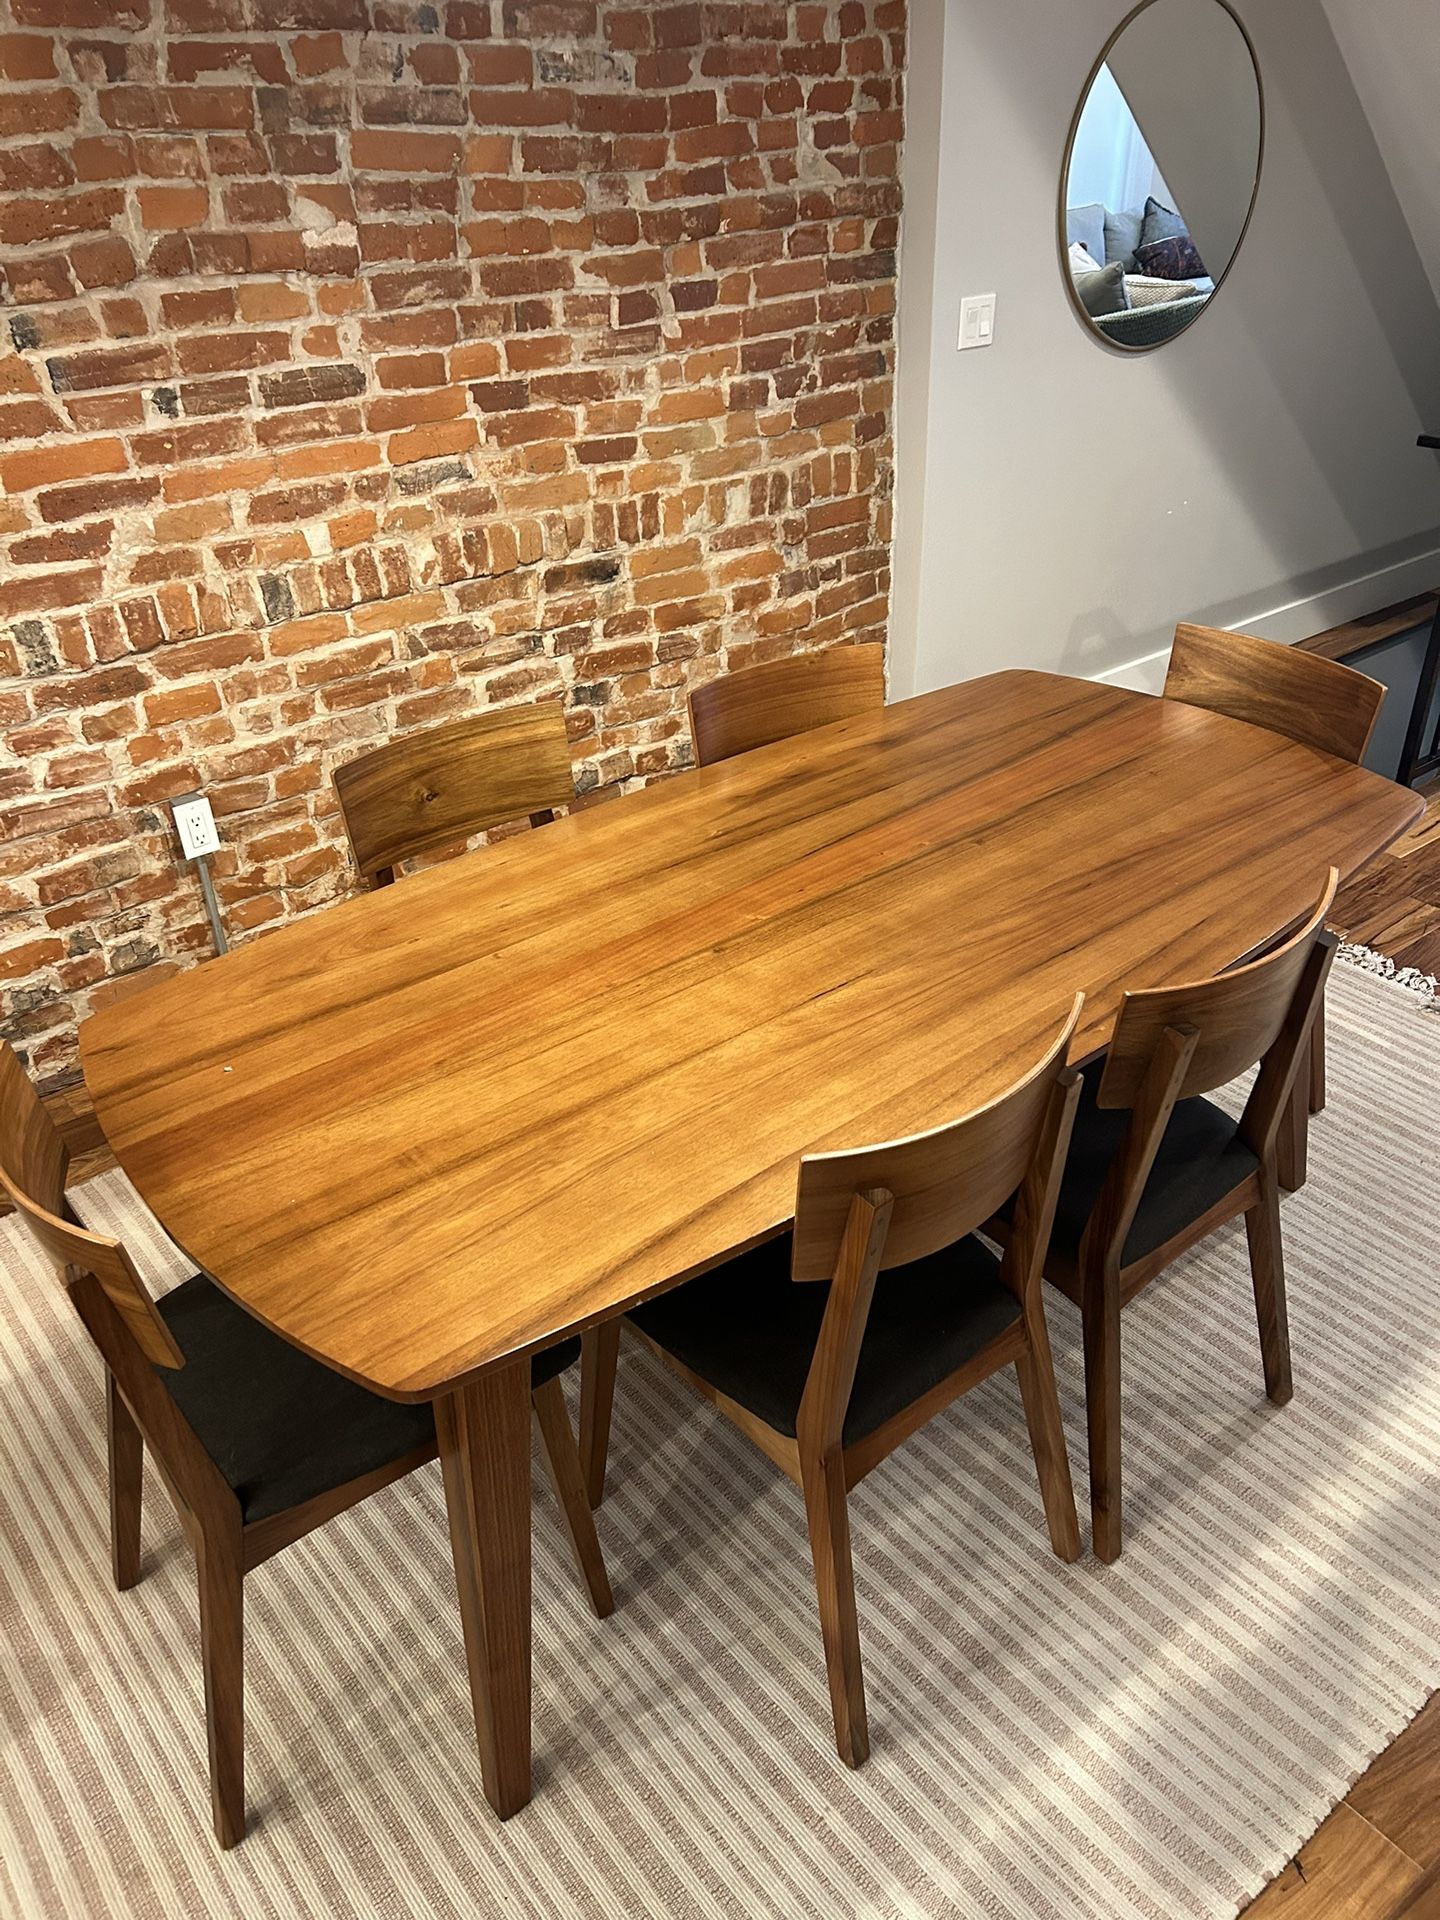 6 Seat Dining Room Table 